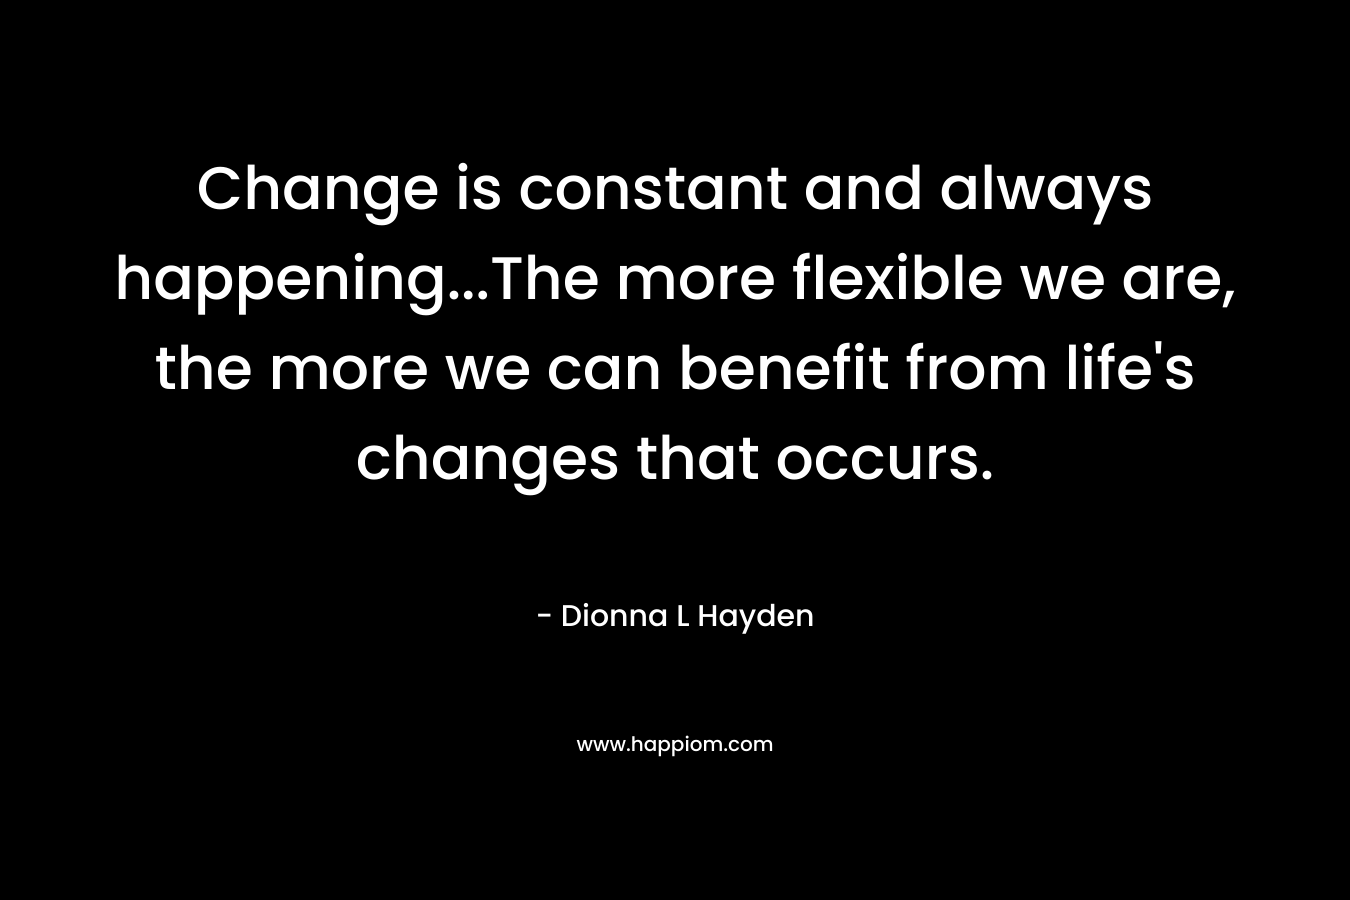 Change is constant and always happening...The more flexible we are, the more we can benefit from life's changes that occurs.